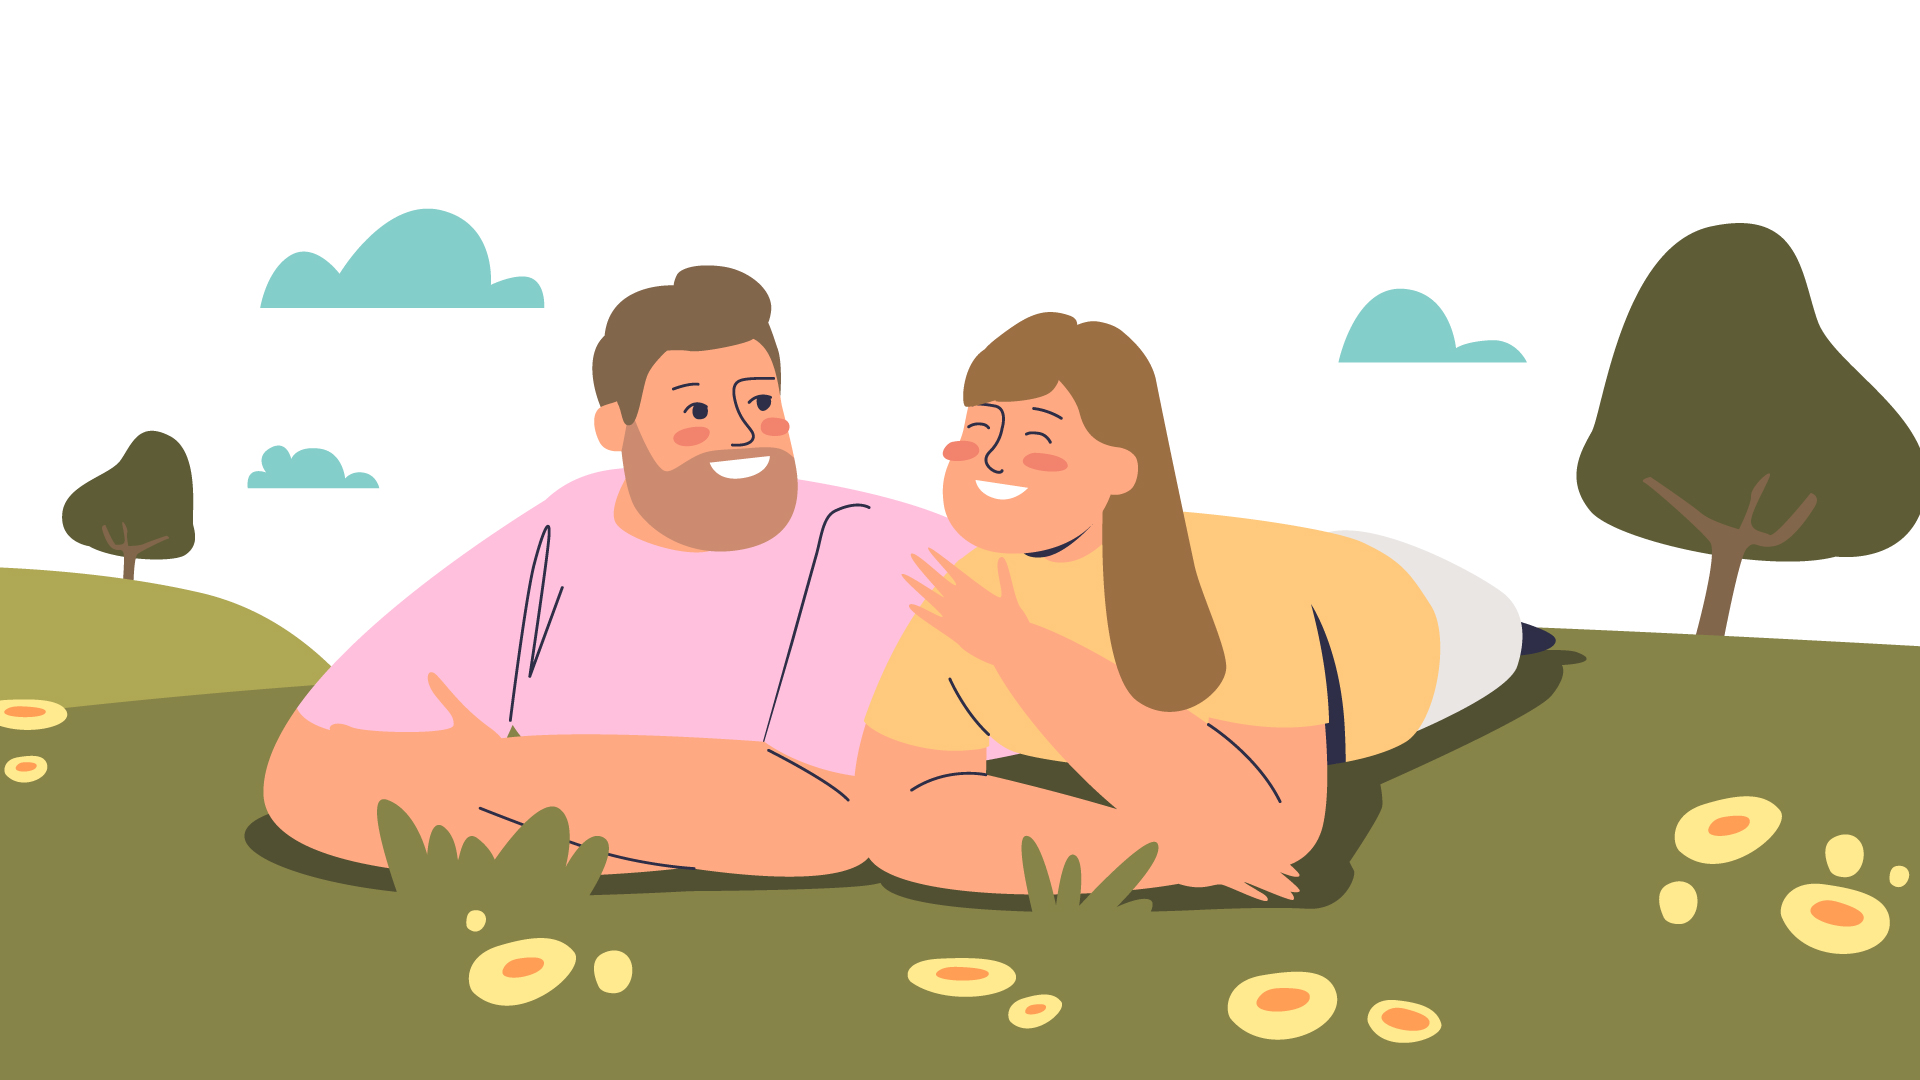 Brunette man and woman lying on the grass in a park and conversing with each other while smiling. It's a sunny day.